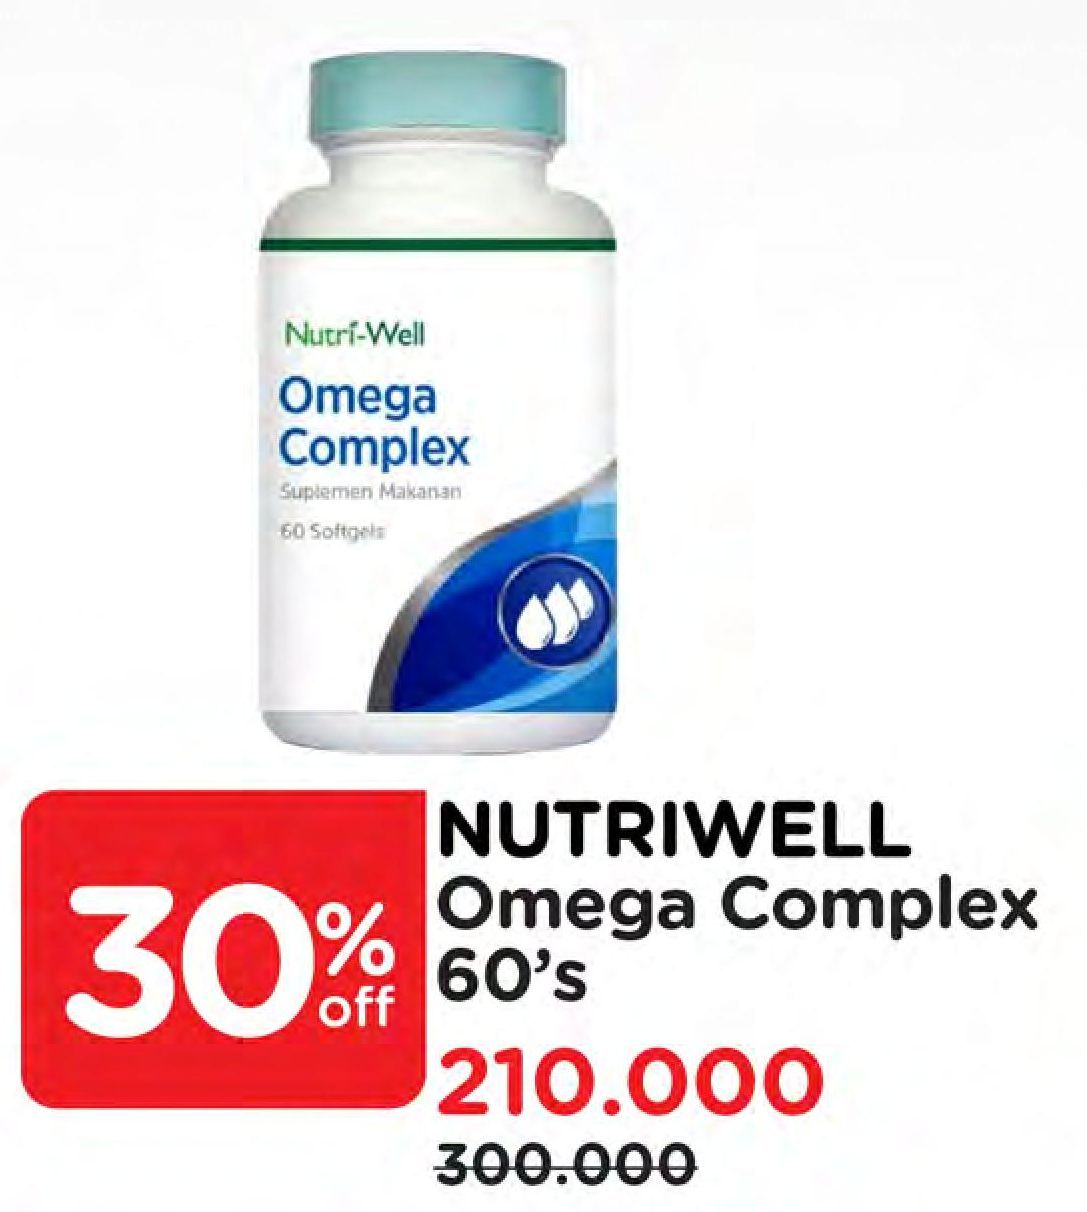 Nutriwell Omega Complex